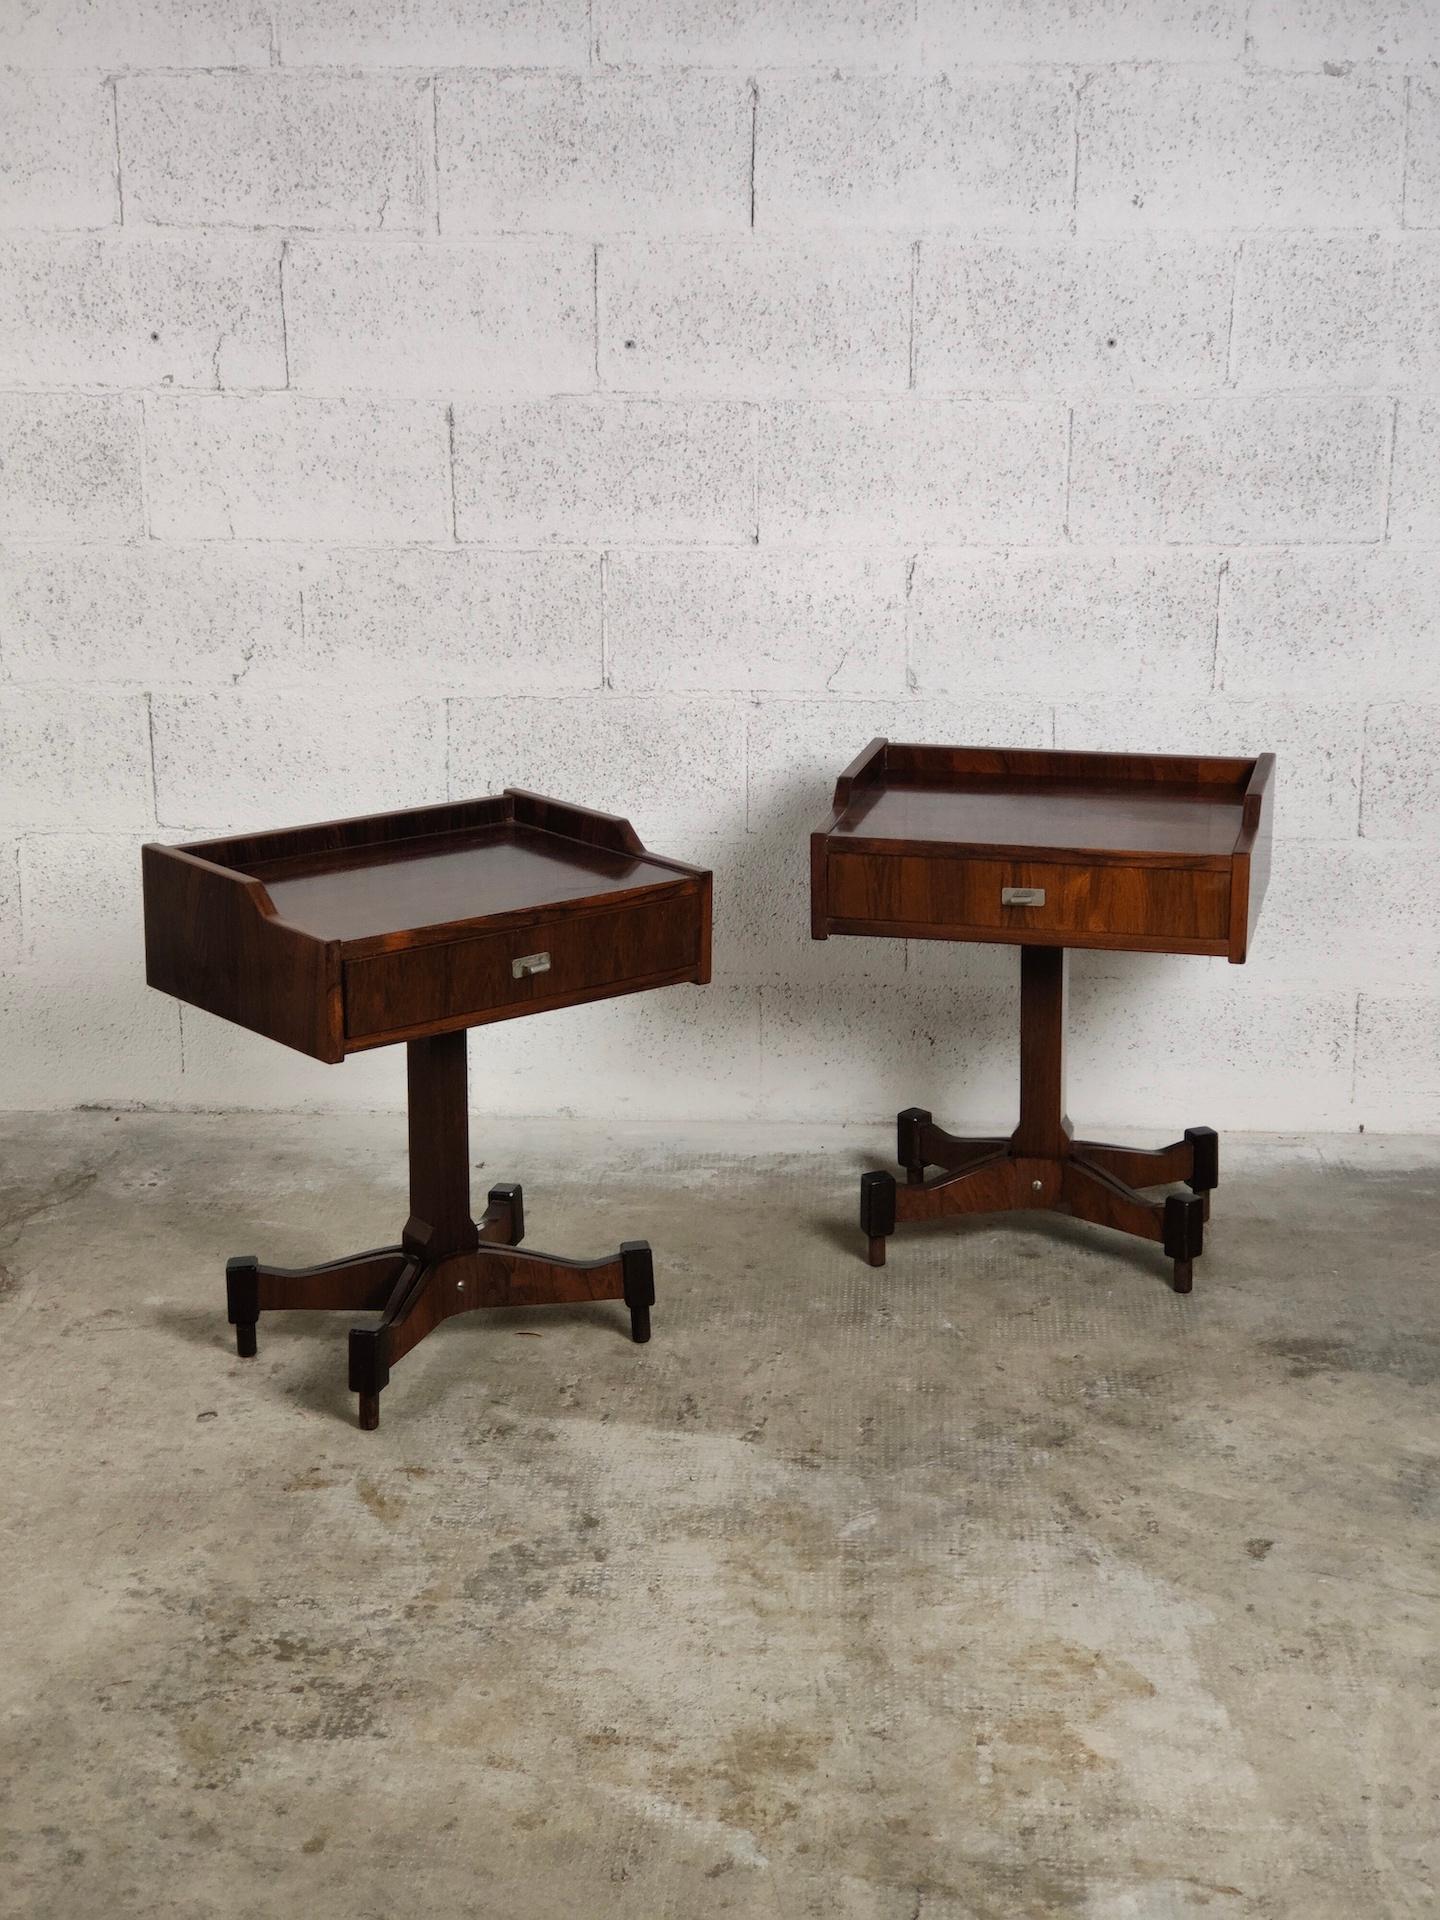 Pair of outstanding wooden nightstands designed by Claudio Salocchi and manufactured by Sormani in 1960s, Italy.
In very good condition
Dimensions: W 50 cm - D 37 cm - H 57 cm 


Claudio Salocchi
Internationally renowned designer and